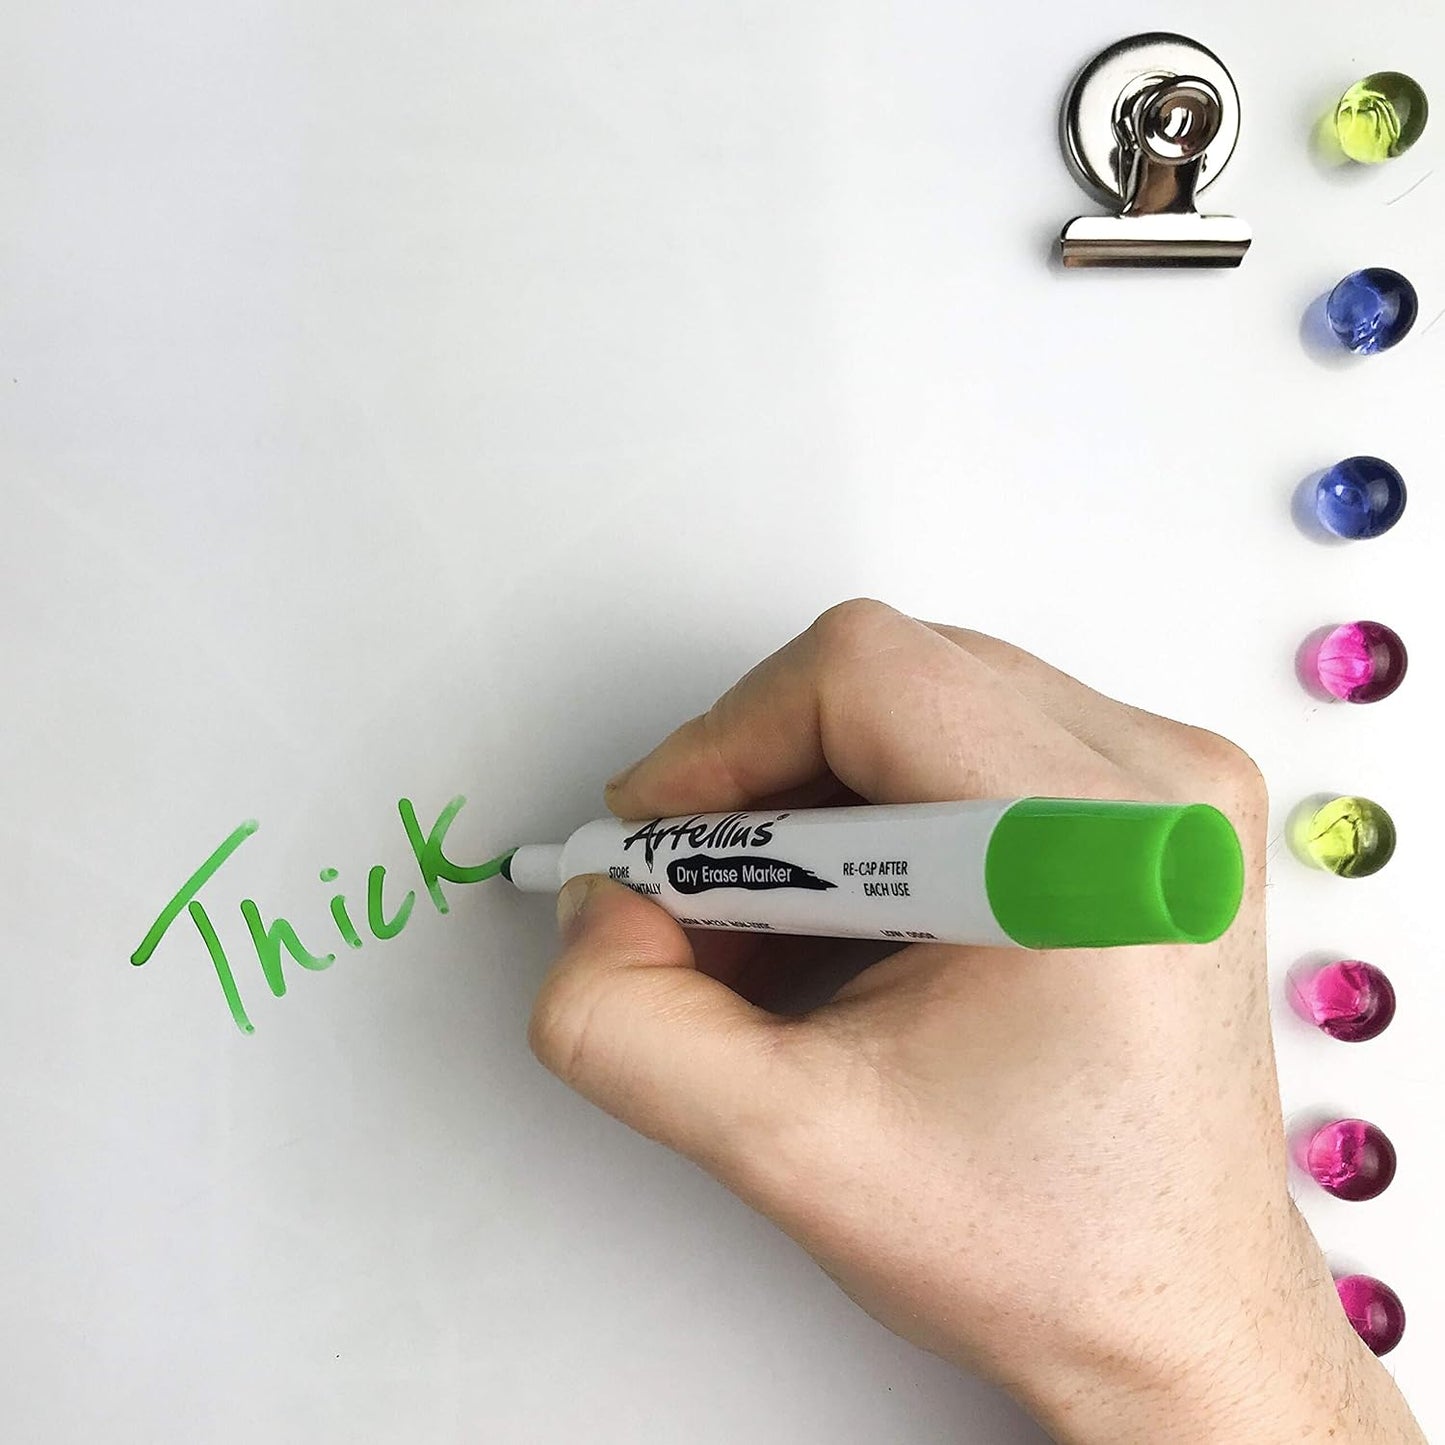 40 Pack of Dry Erase Markers (12 ASSORTED COLORS W/ 7 EXTRA BLACK) - Thick Barrel Design - Perfect Pens for Writing on Whiteboards, Dry-Erase Boards, Mirrors, & All White Board Surfaces